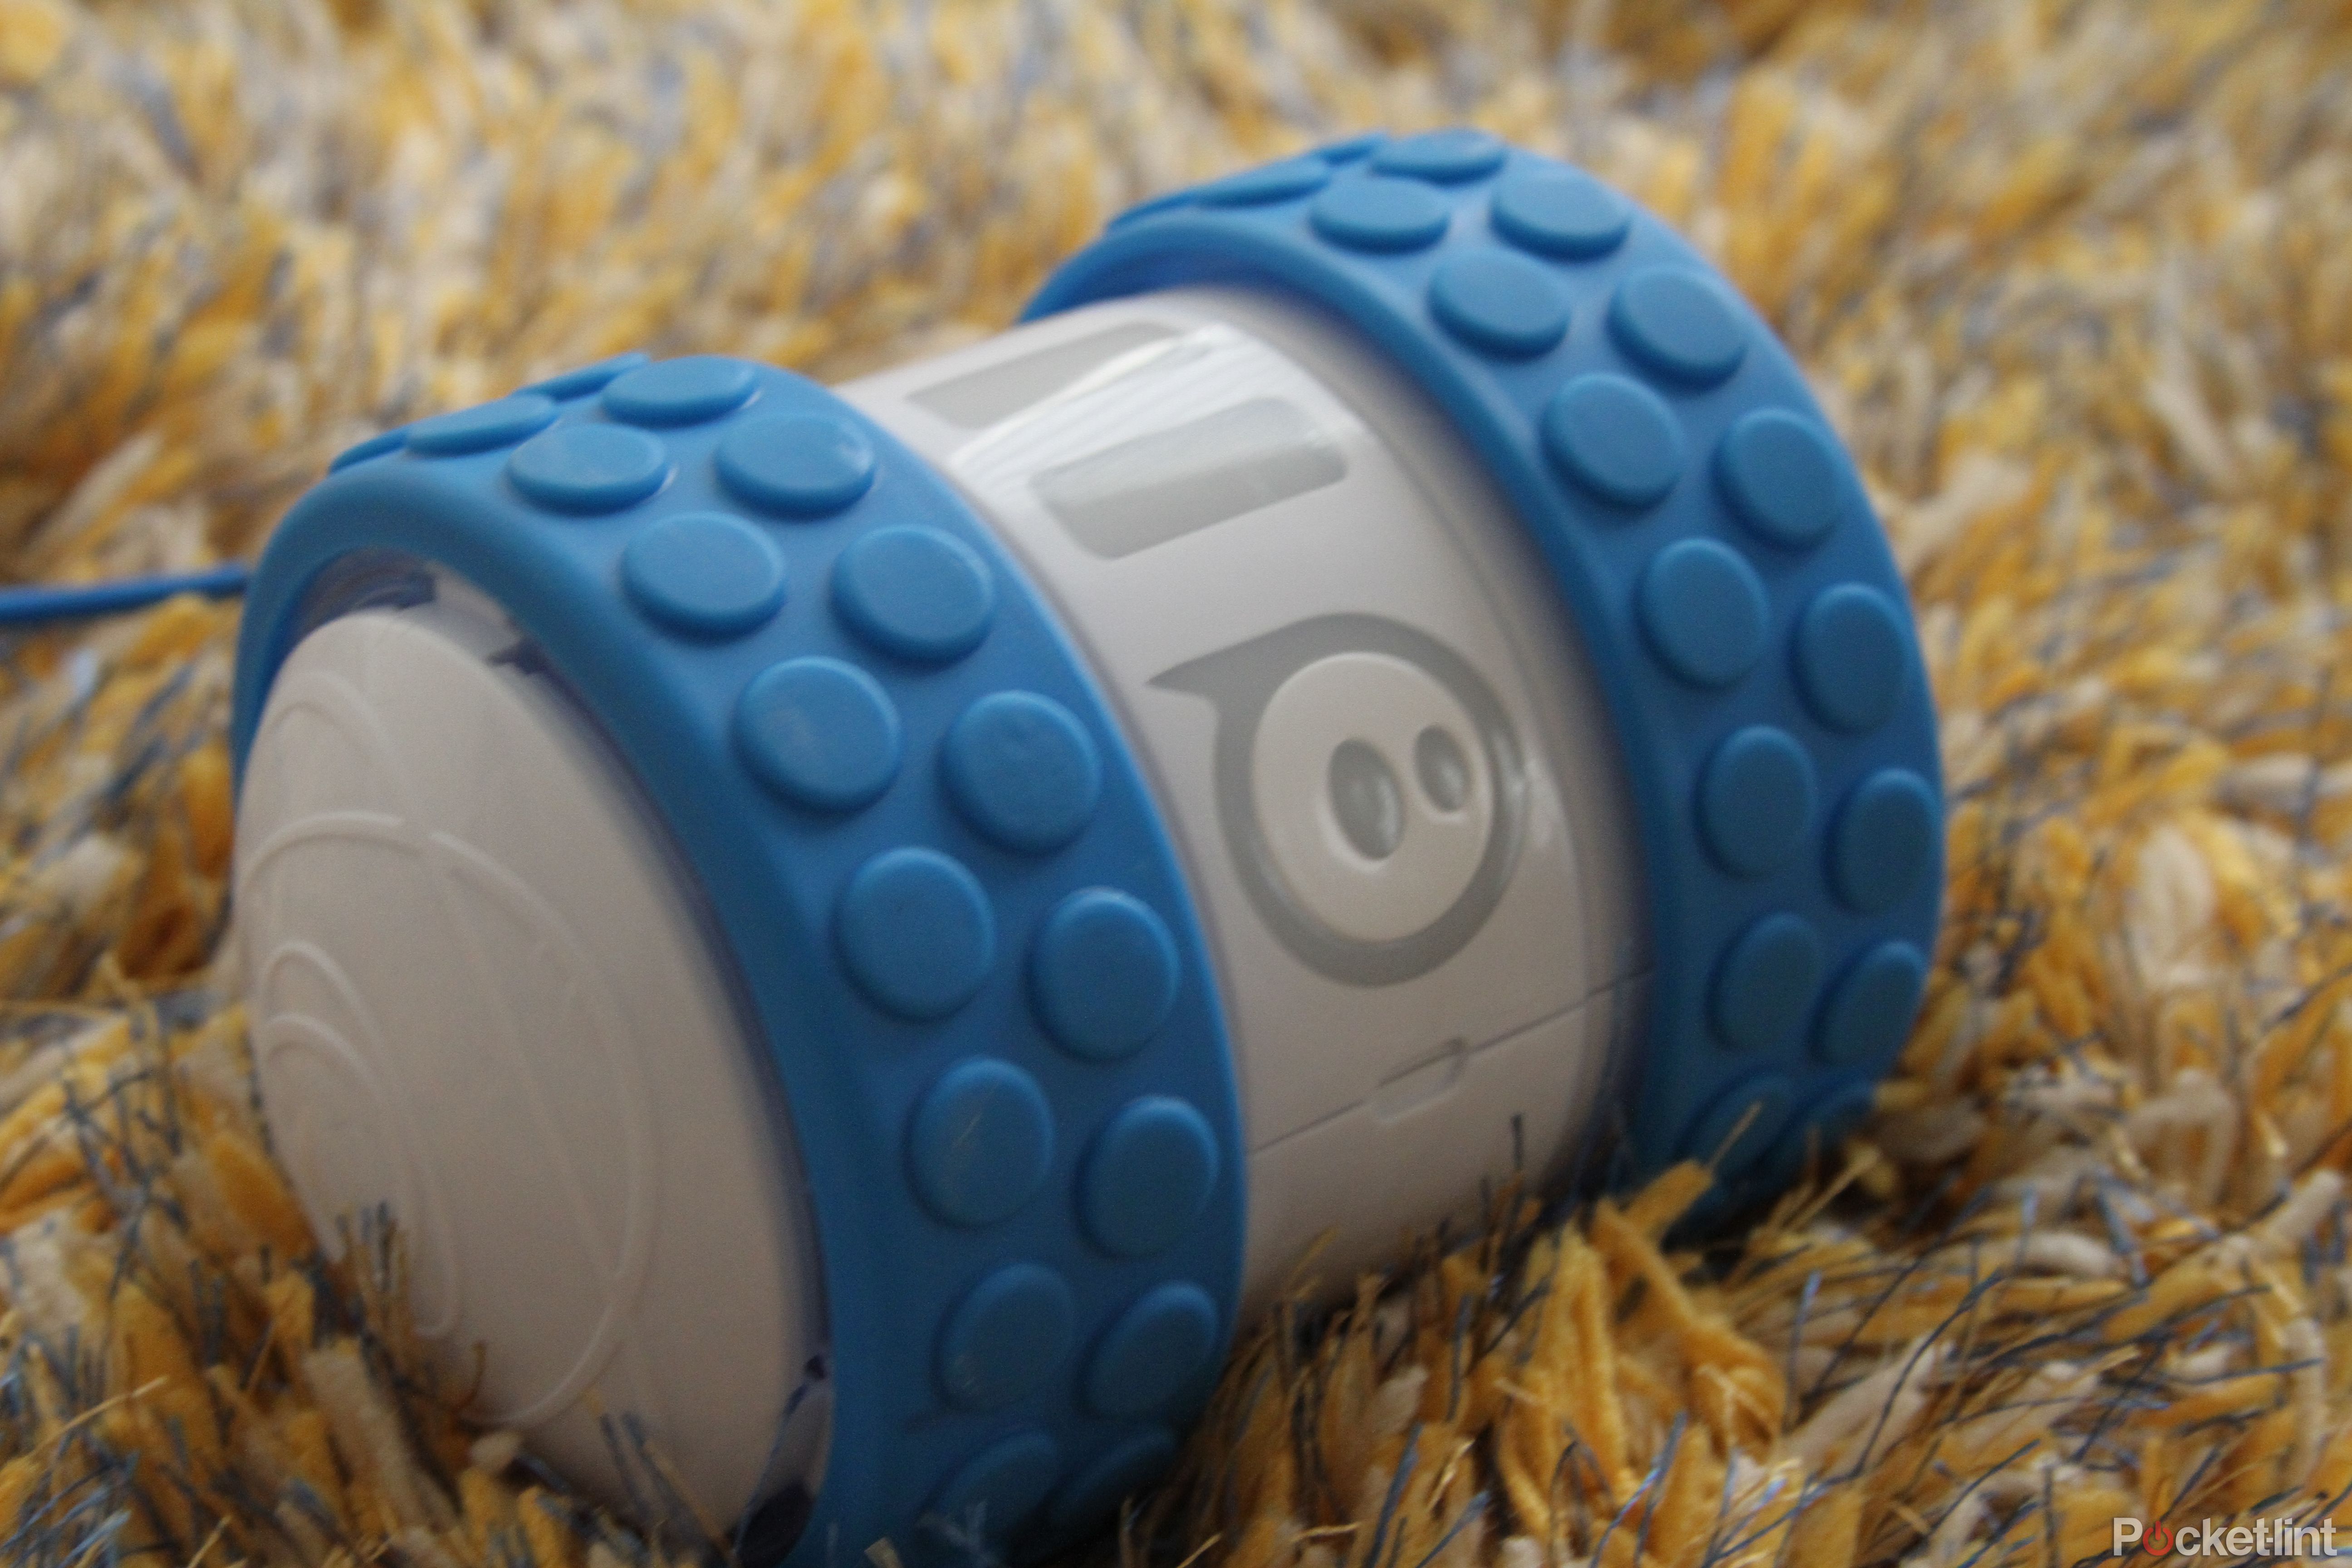 sphero ollie hands on review cylindrical fast and totally cool image 12